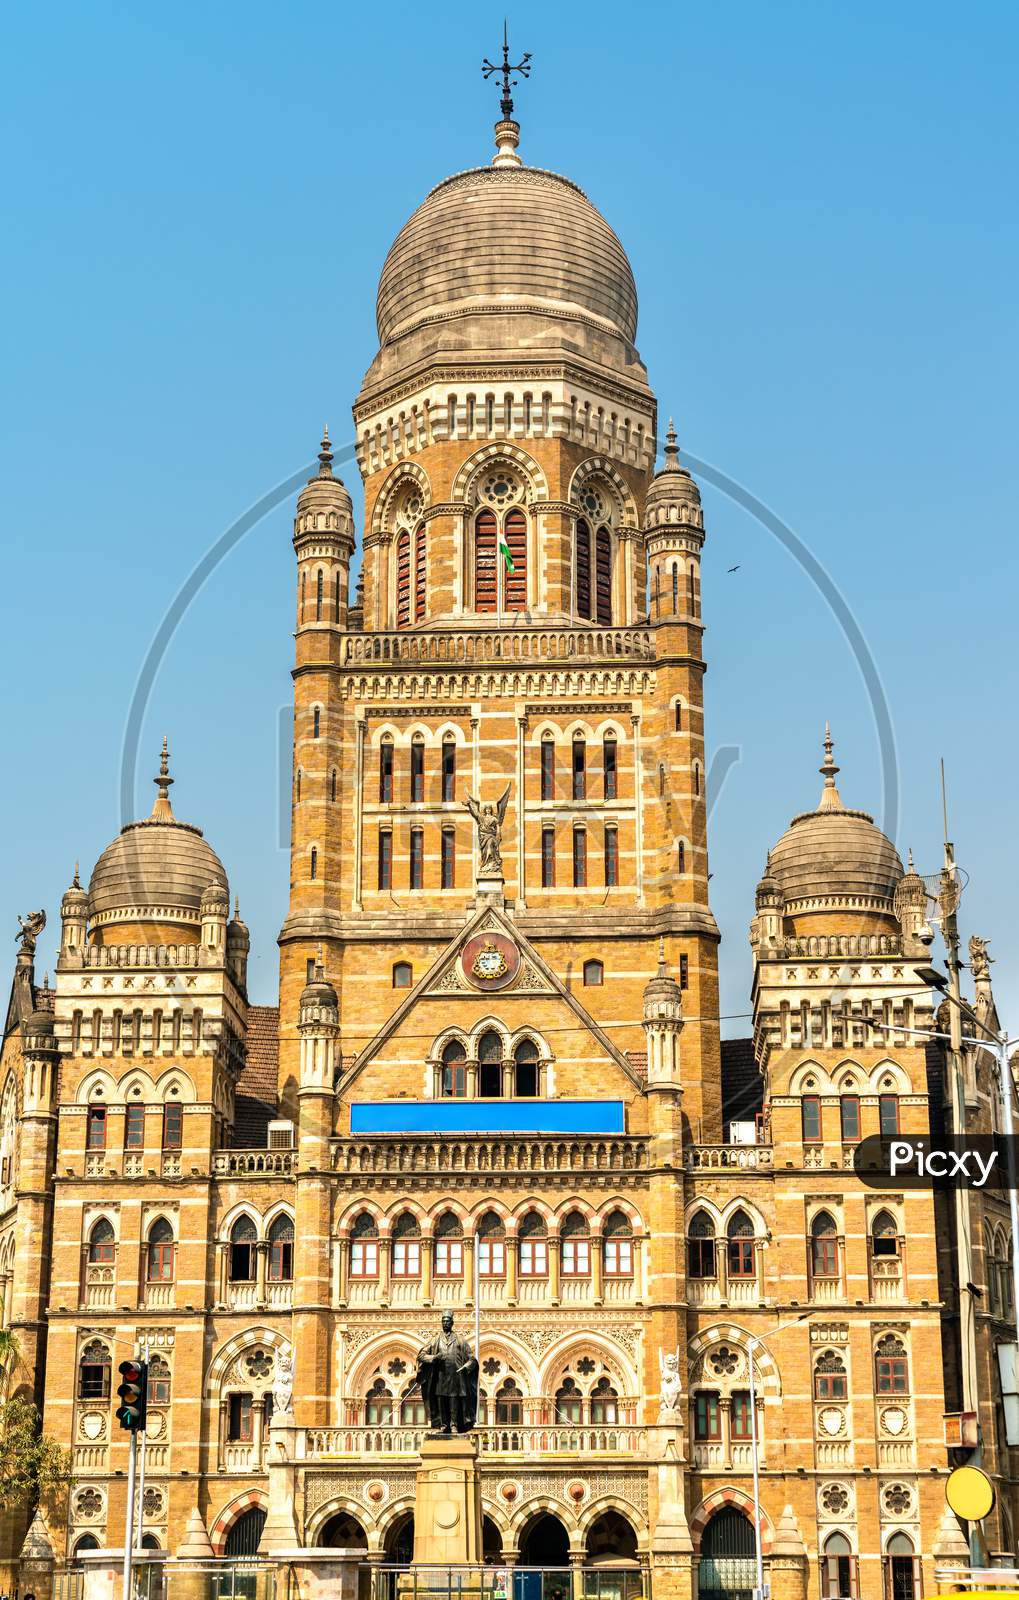 Municipal Corporation Building. Built In 1893, It Is A Heritage Building In Mumbai, India